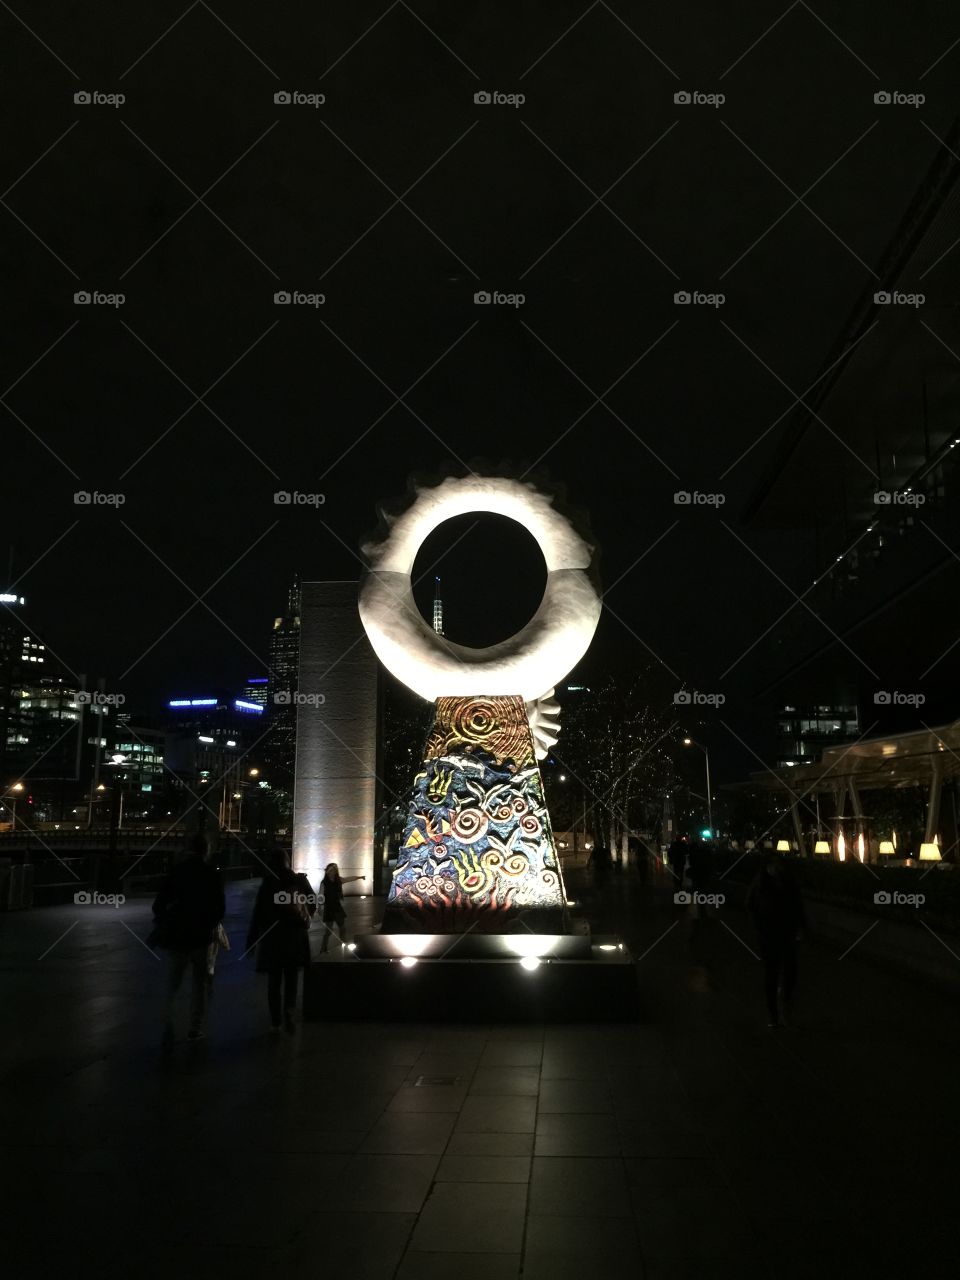 Melbourne art. This photo was taken at night in Melbourne the art work looked so beautiful at night with the lights and the city!!